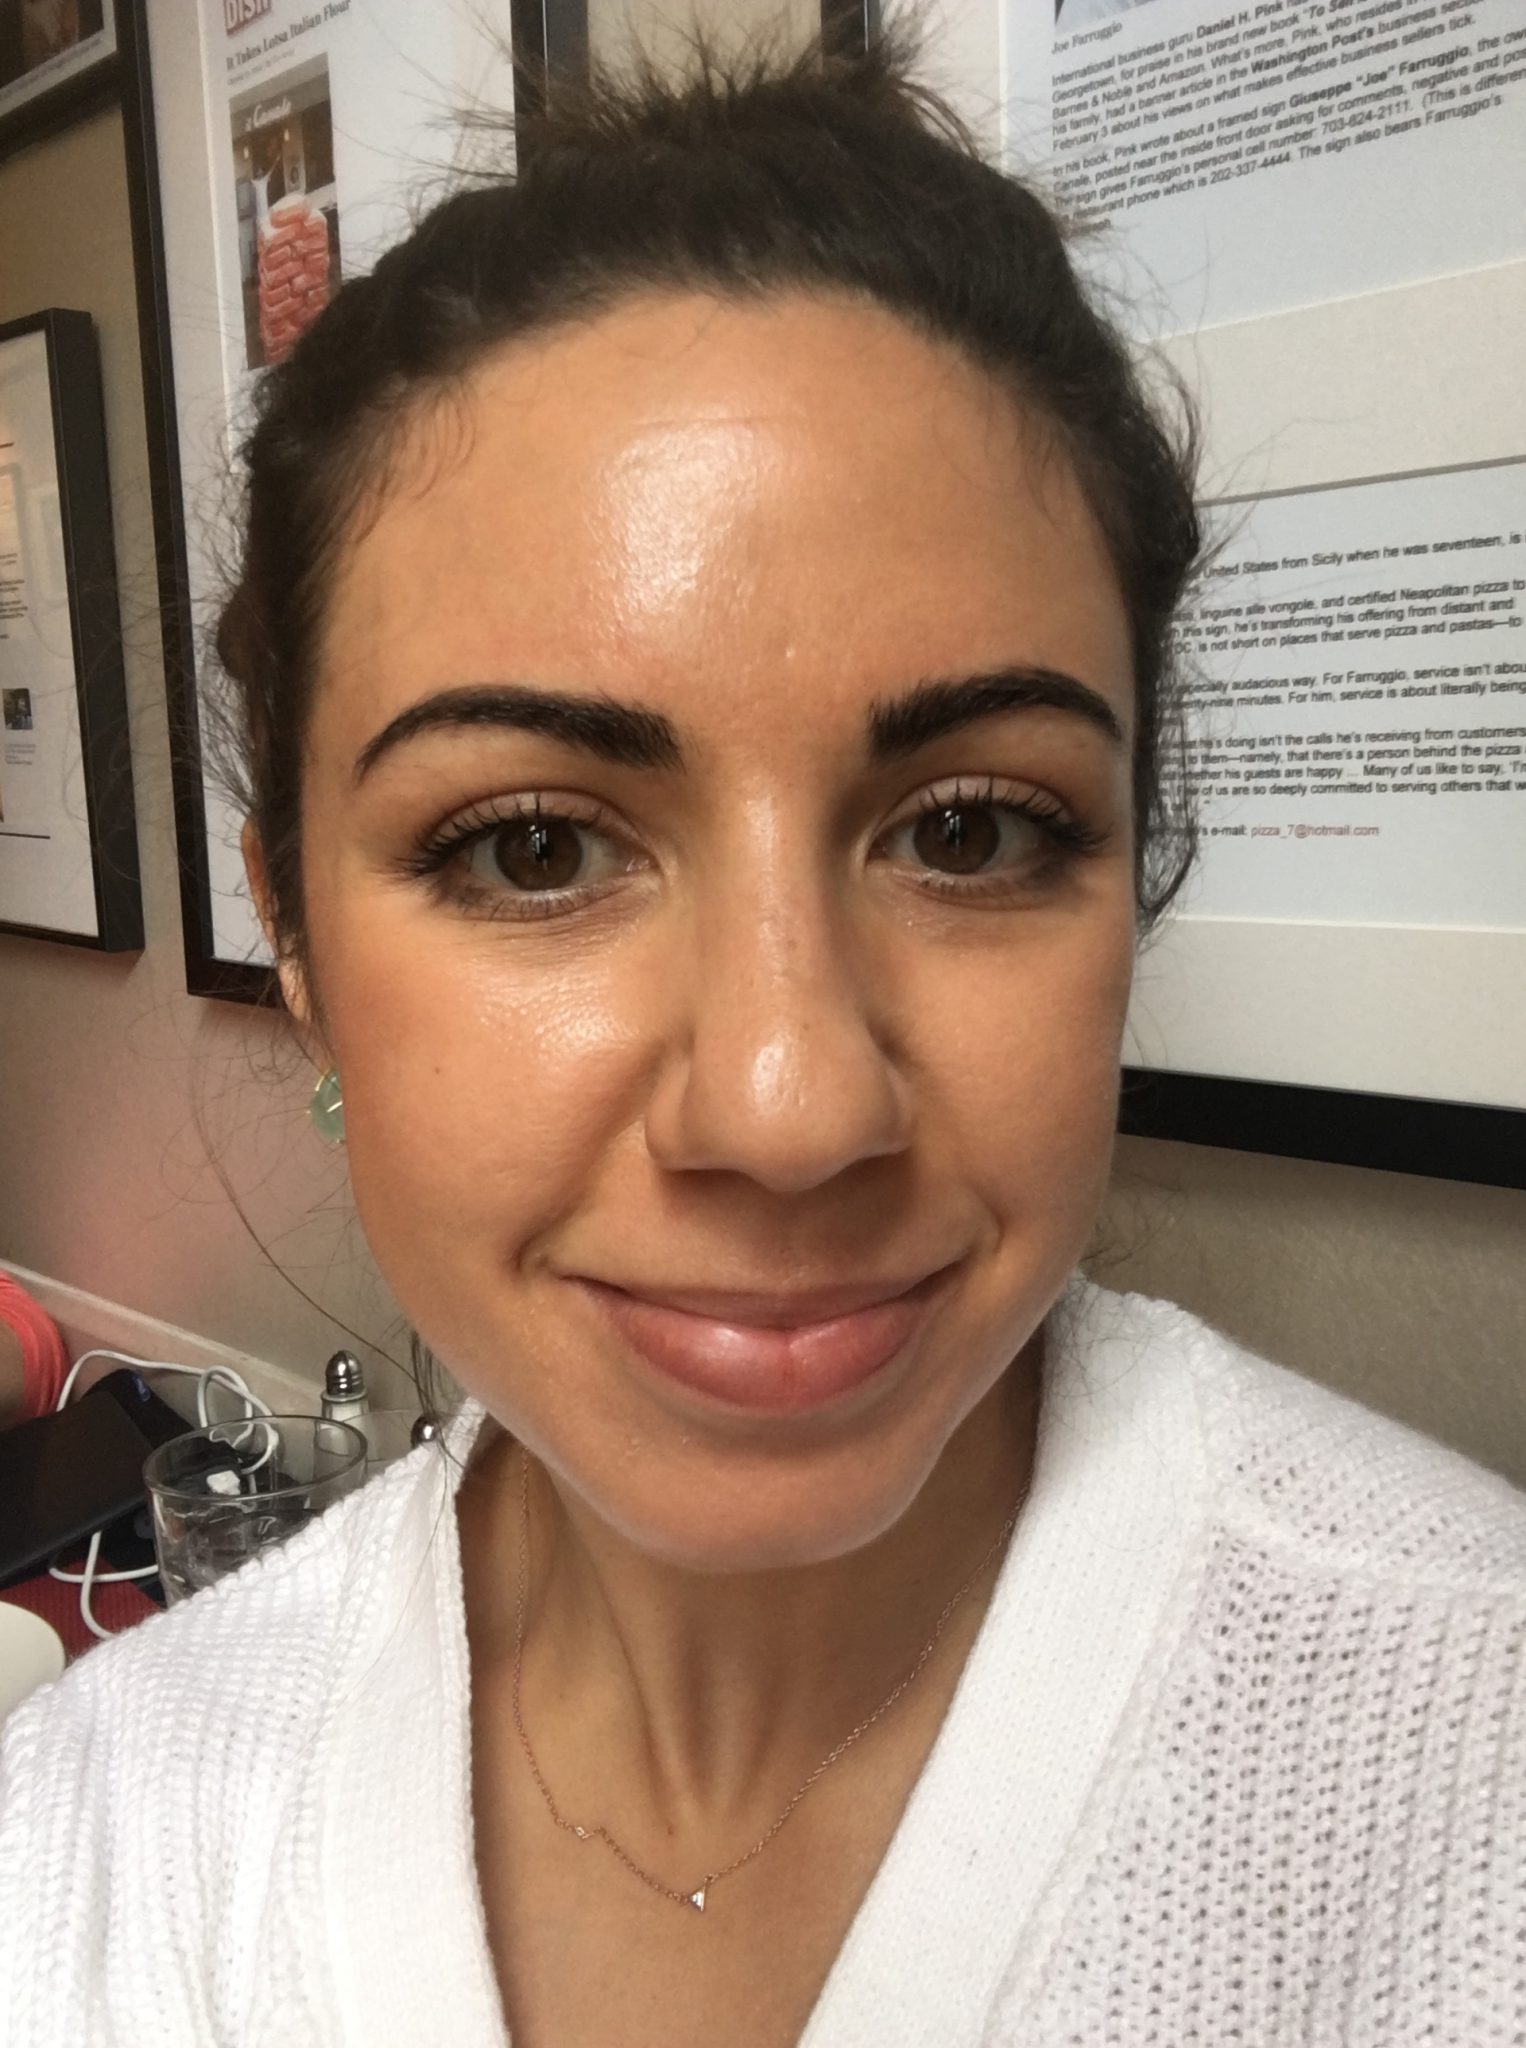 Lifestyle blogger Roxanne of Glass of Glam's eyebrow Microblading experience